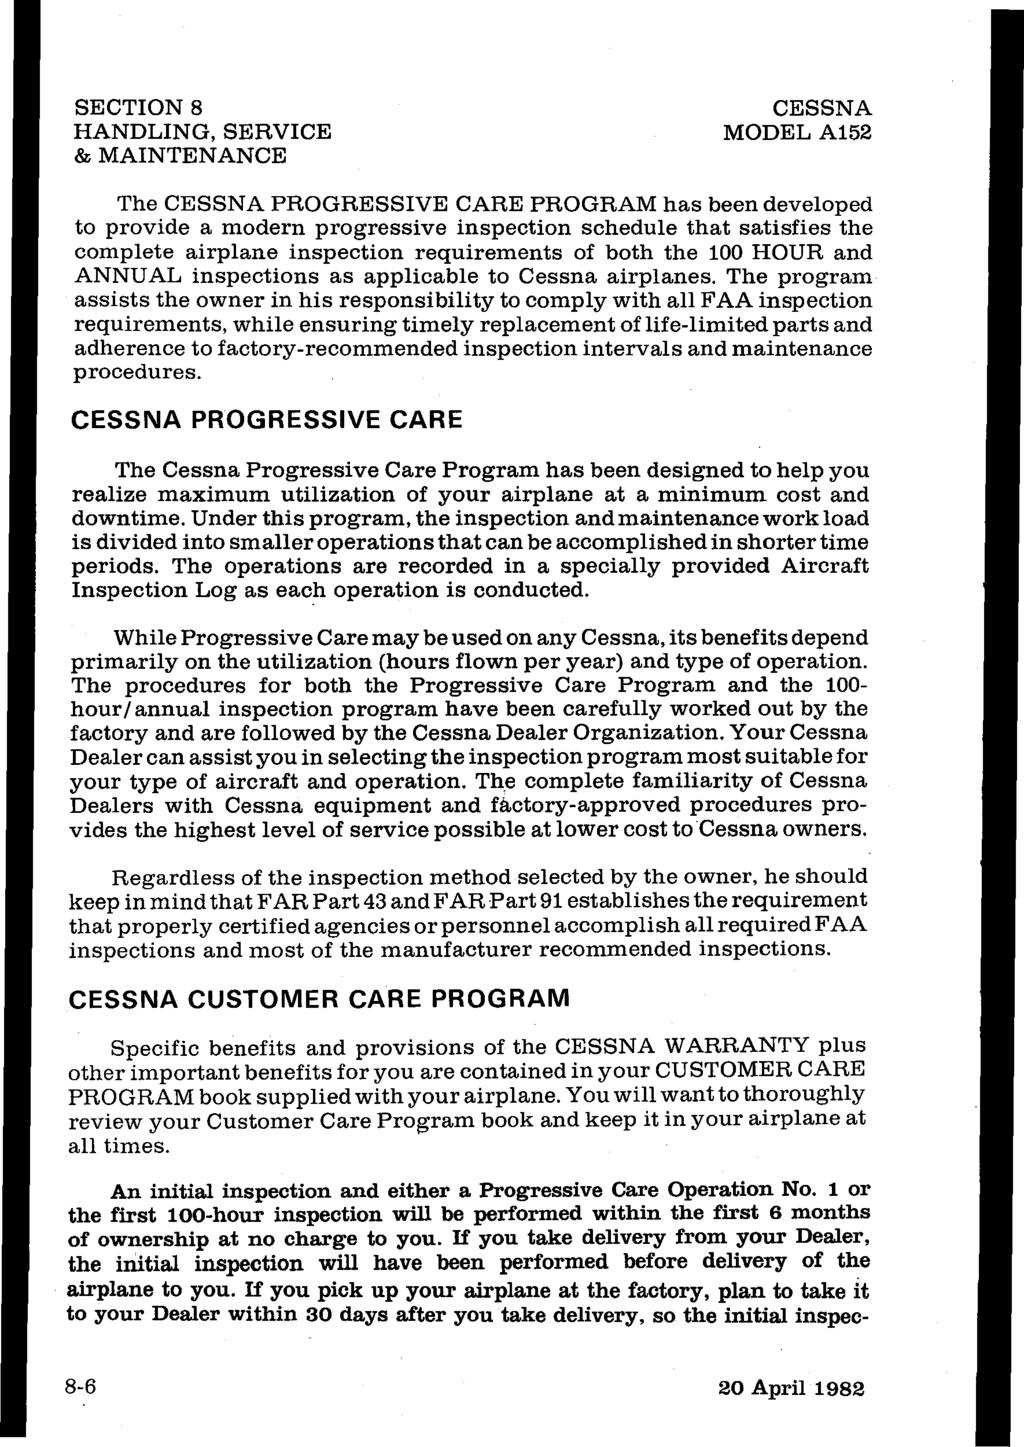 SECTION 8 HANDLING, SERVICE & MAINTENANCE CESSNA MODEL A152 The CESSNA PROGRESSIVE CARE PROGRAM has been developed to provide a modern progressive inspection schedule that satisfies the complete